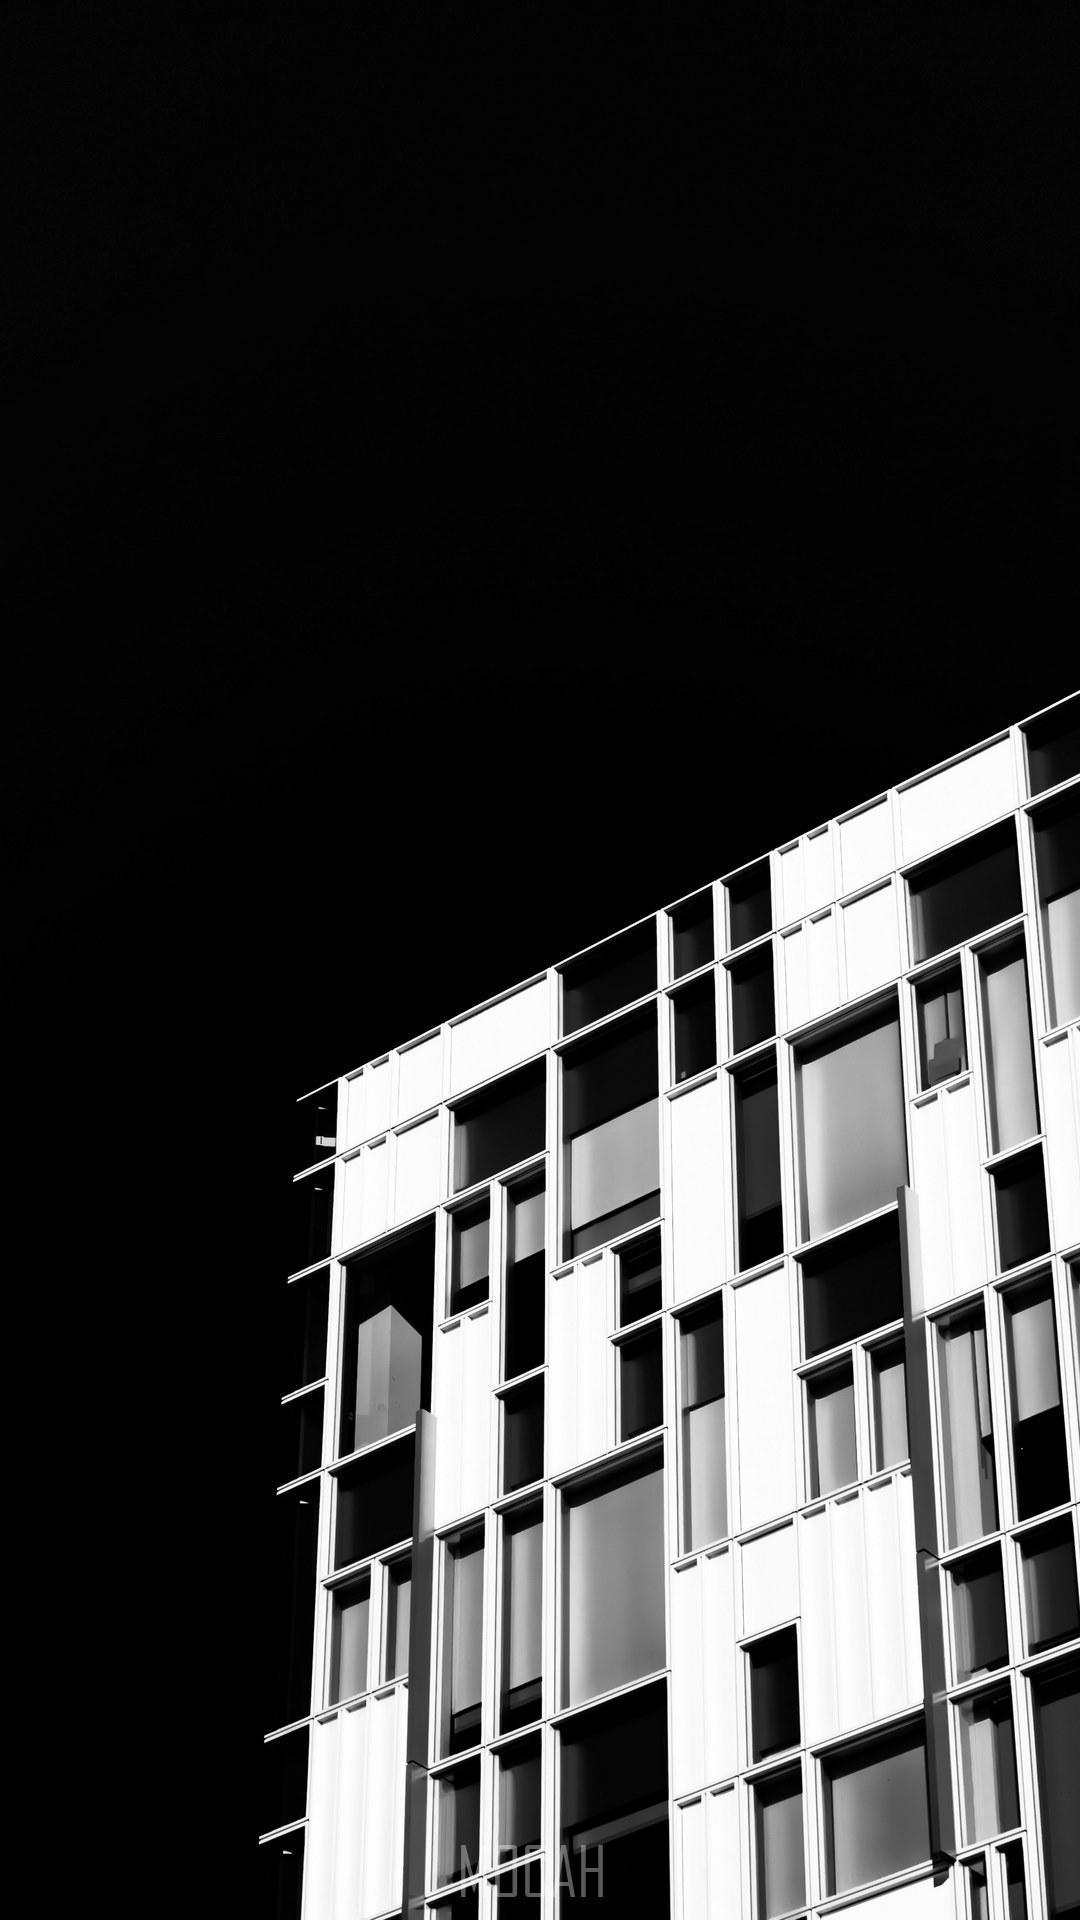 HD wallpaper, A Black And White Shot Of A Facade With Rectangular Windows In Various Sizes, Sony Xperia Xa1 Ultra Background, 1080X1920, Black And White Rectangles